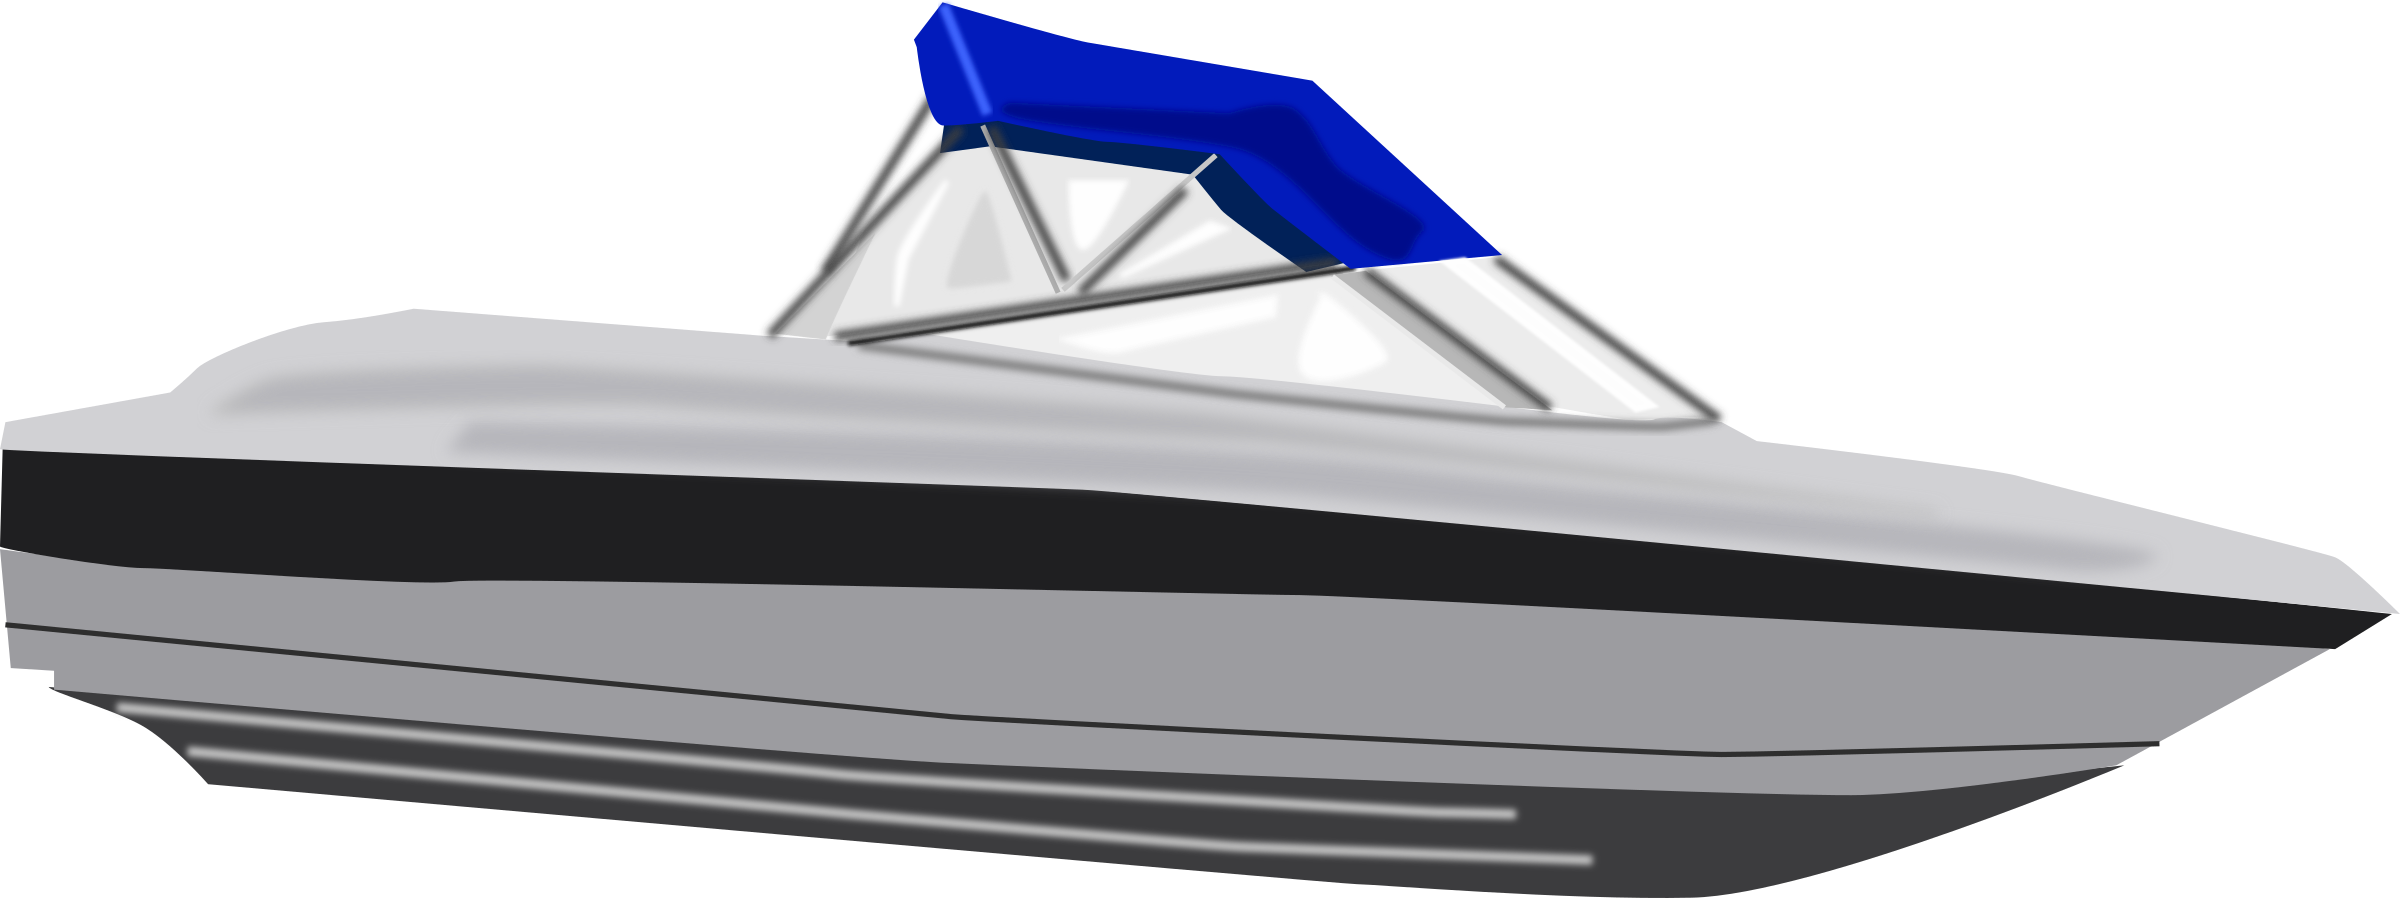 Free Speed Boat Png, Download Free Clip Art, Free Clip Art